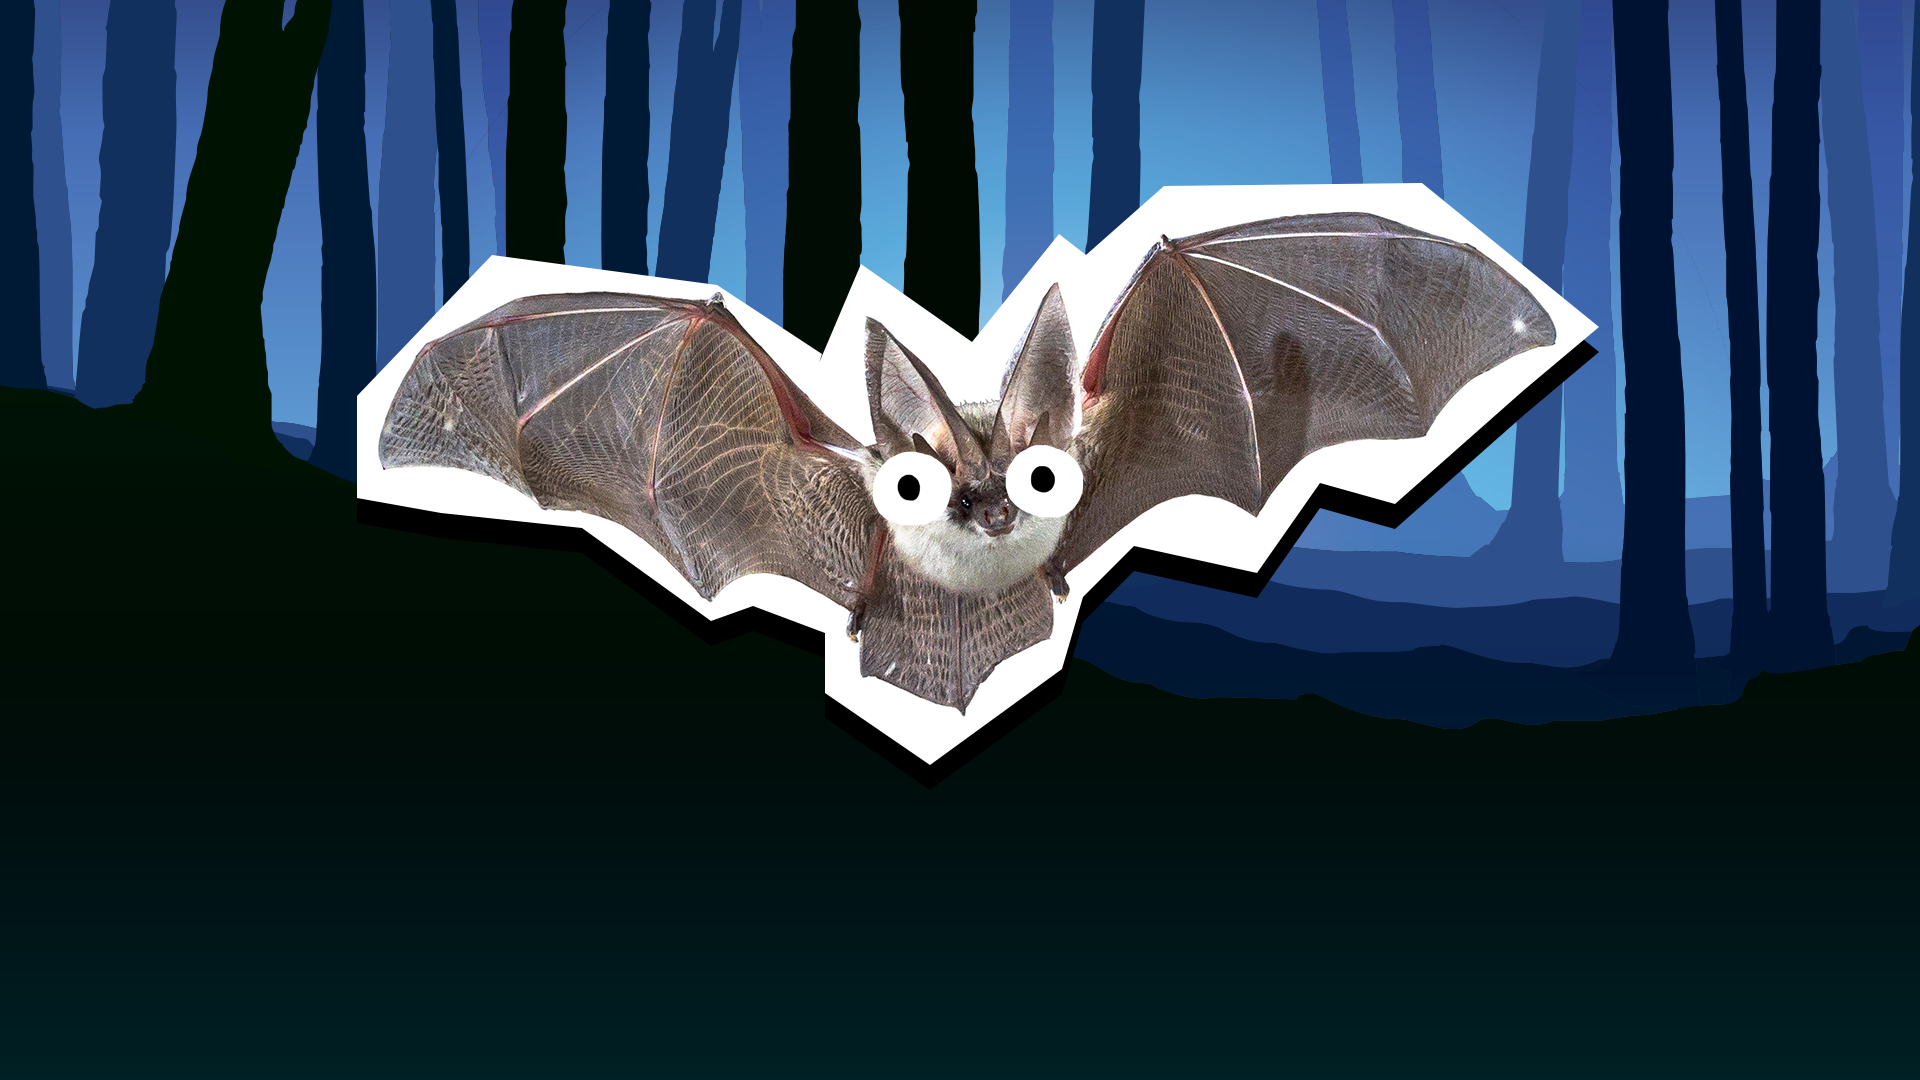 A spooky looking bat flying in a haunted looking forest